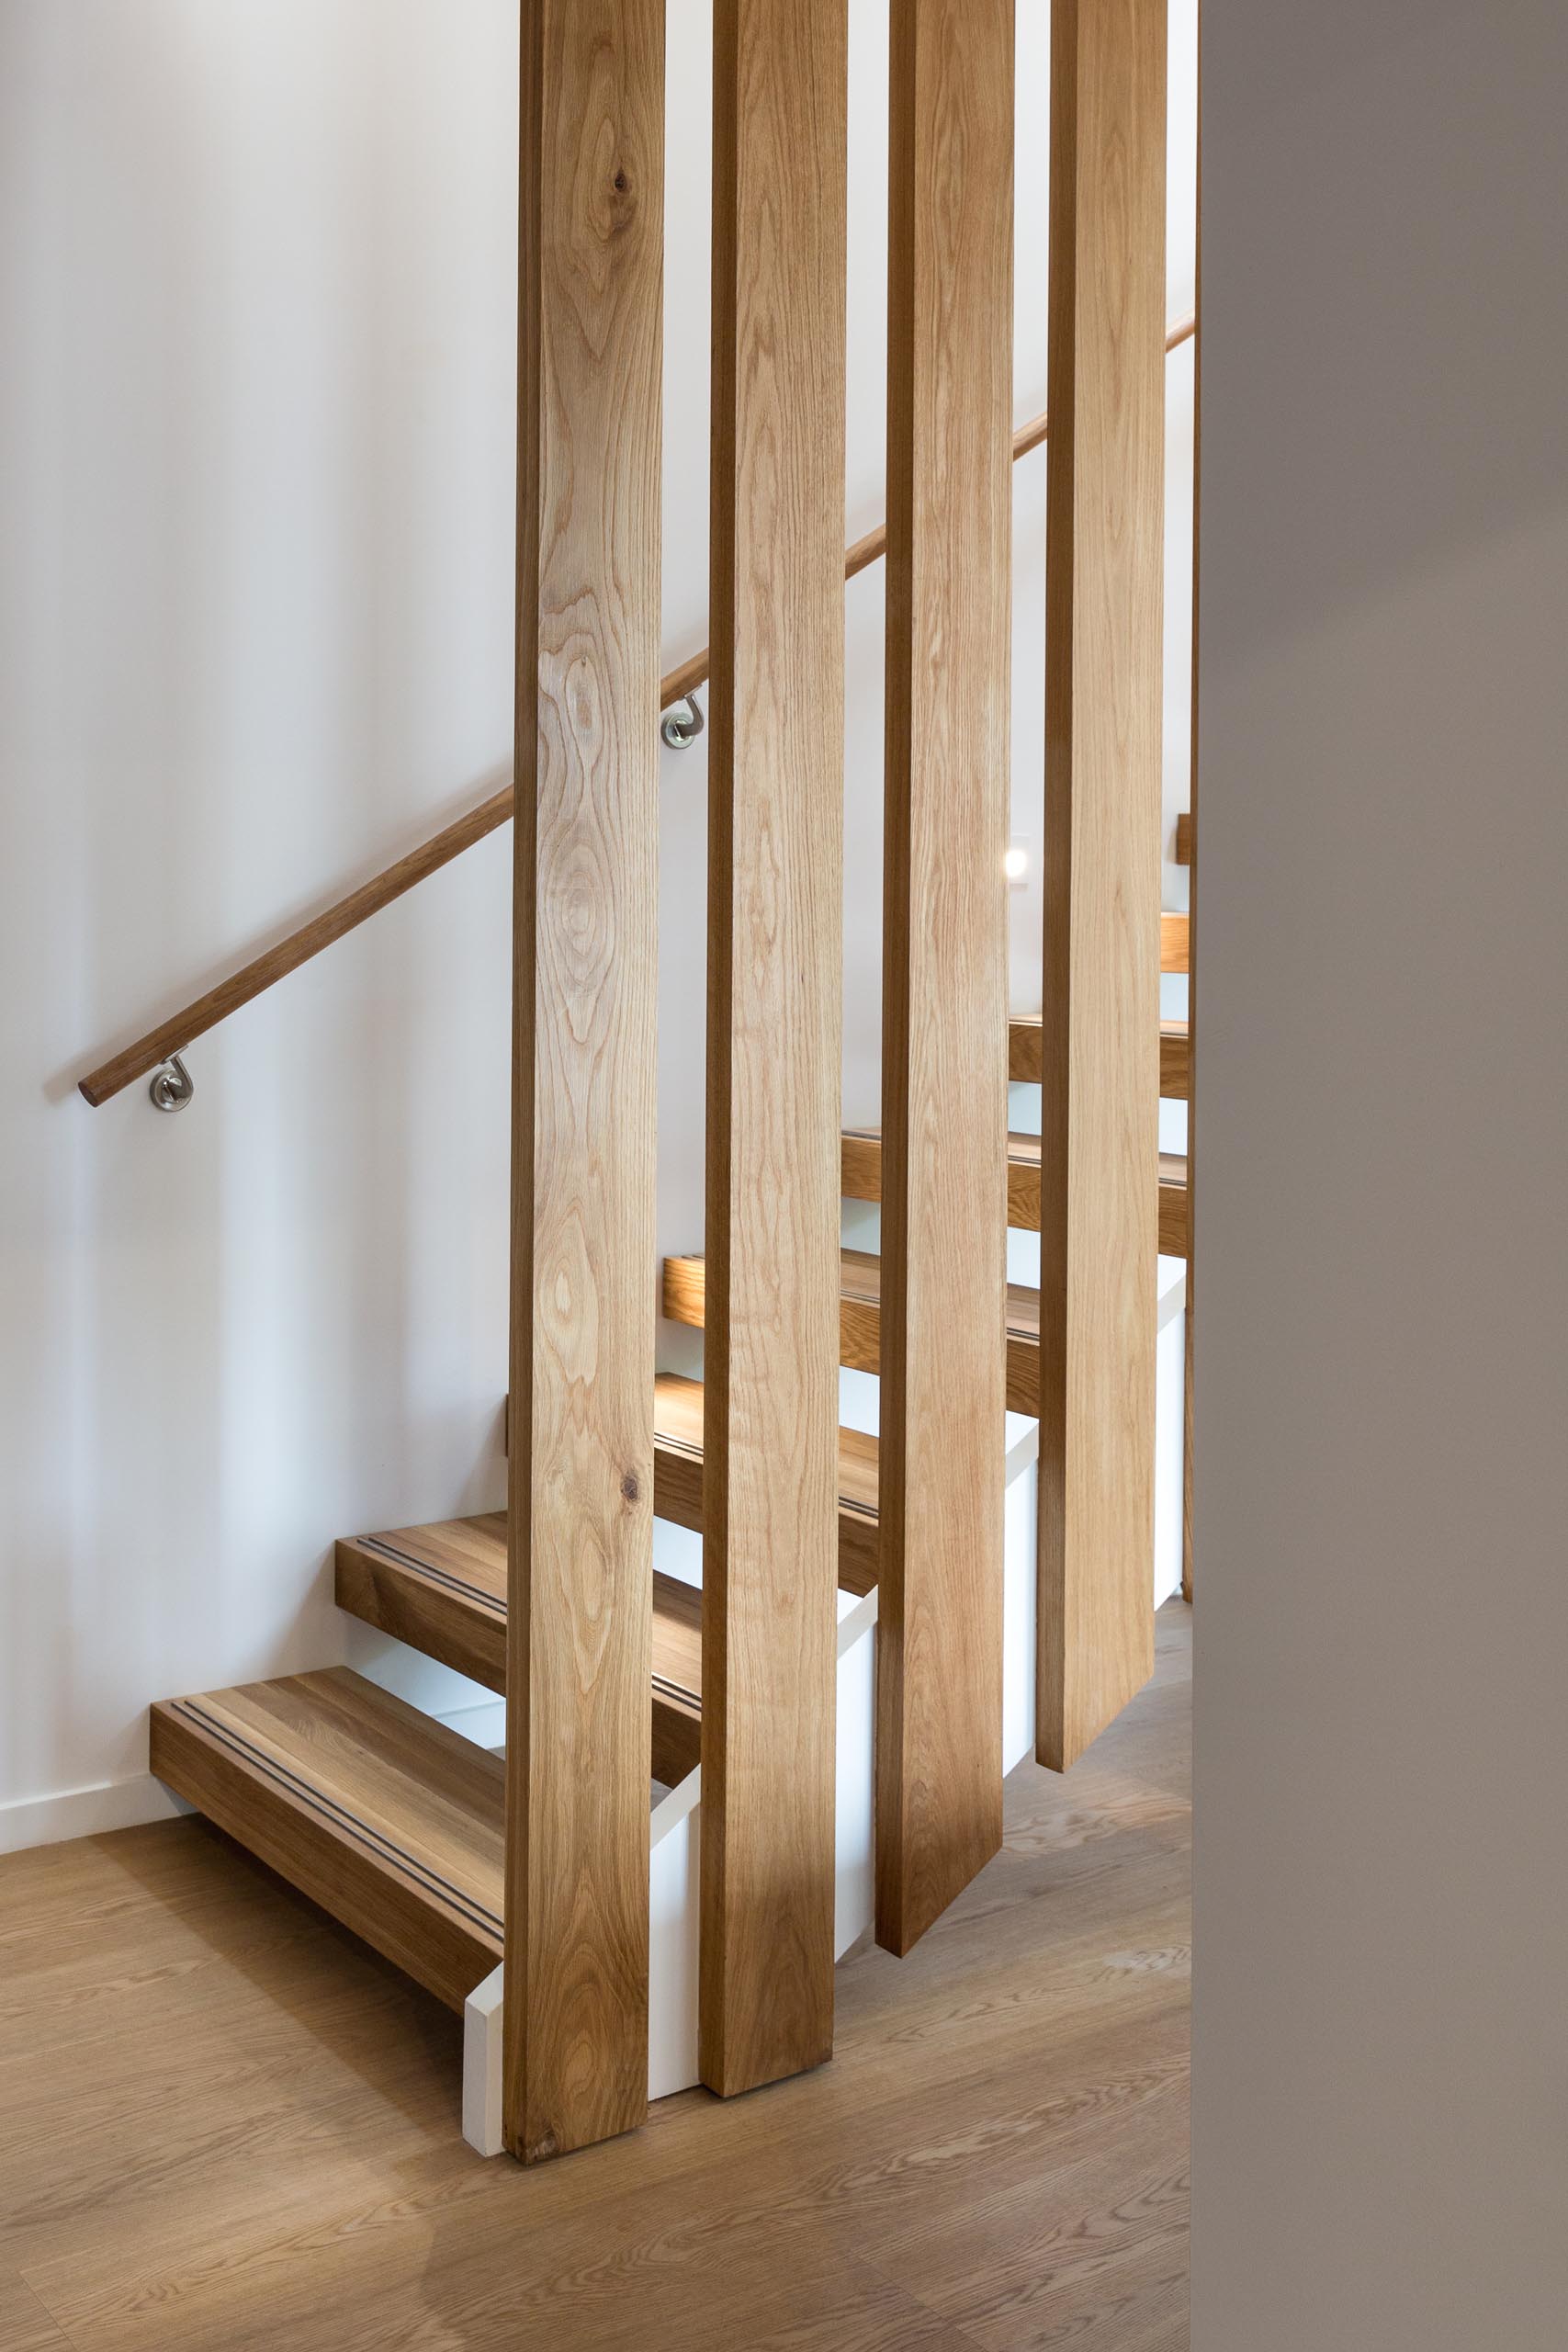 A steel and floating oak staircase with robust timber balusters and embedded stainless steel strips within the stair treads that create a non slip surface.